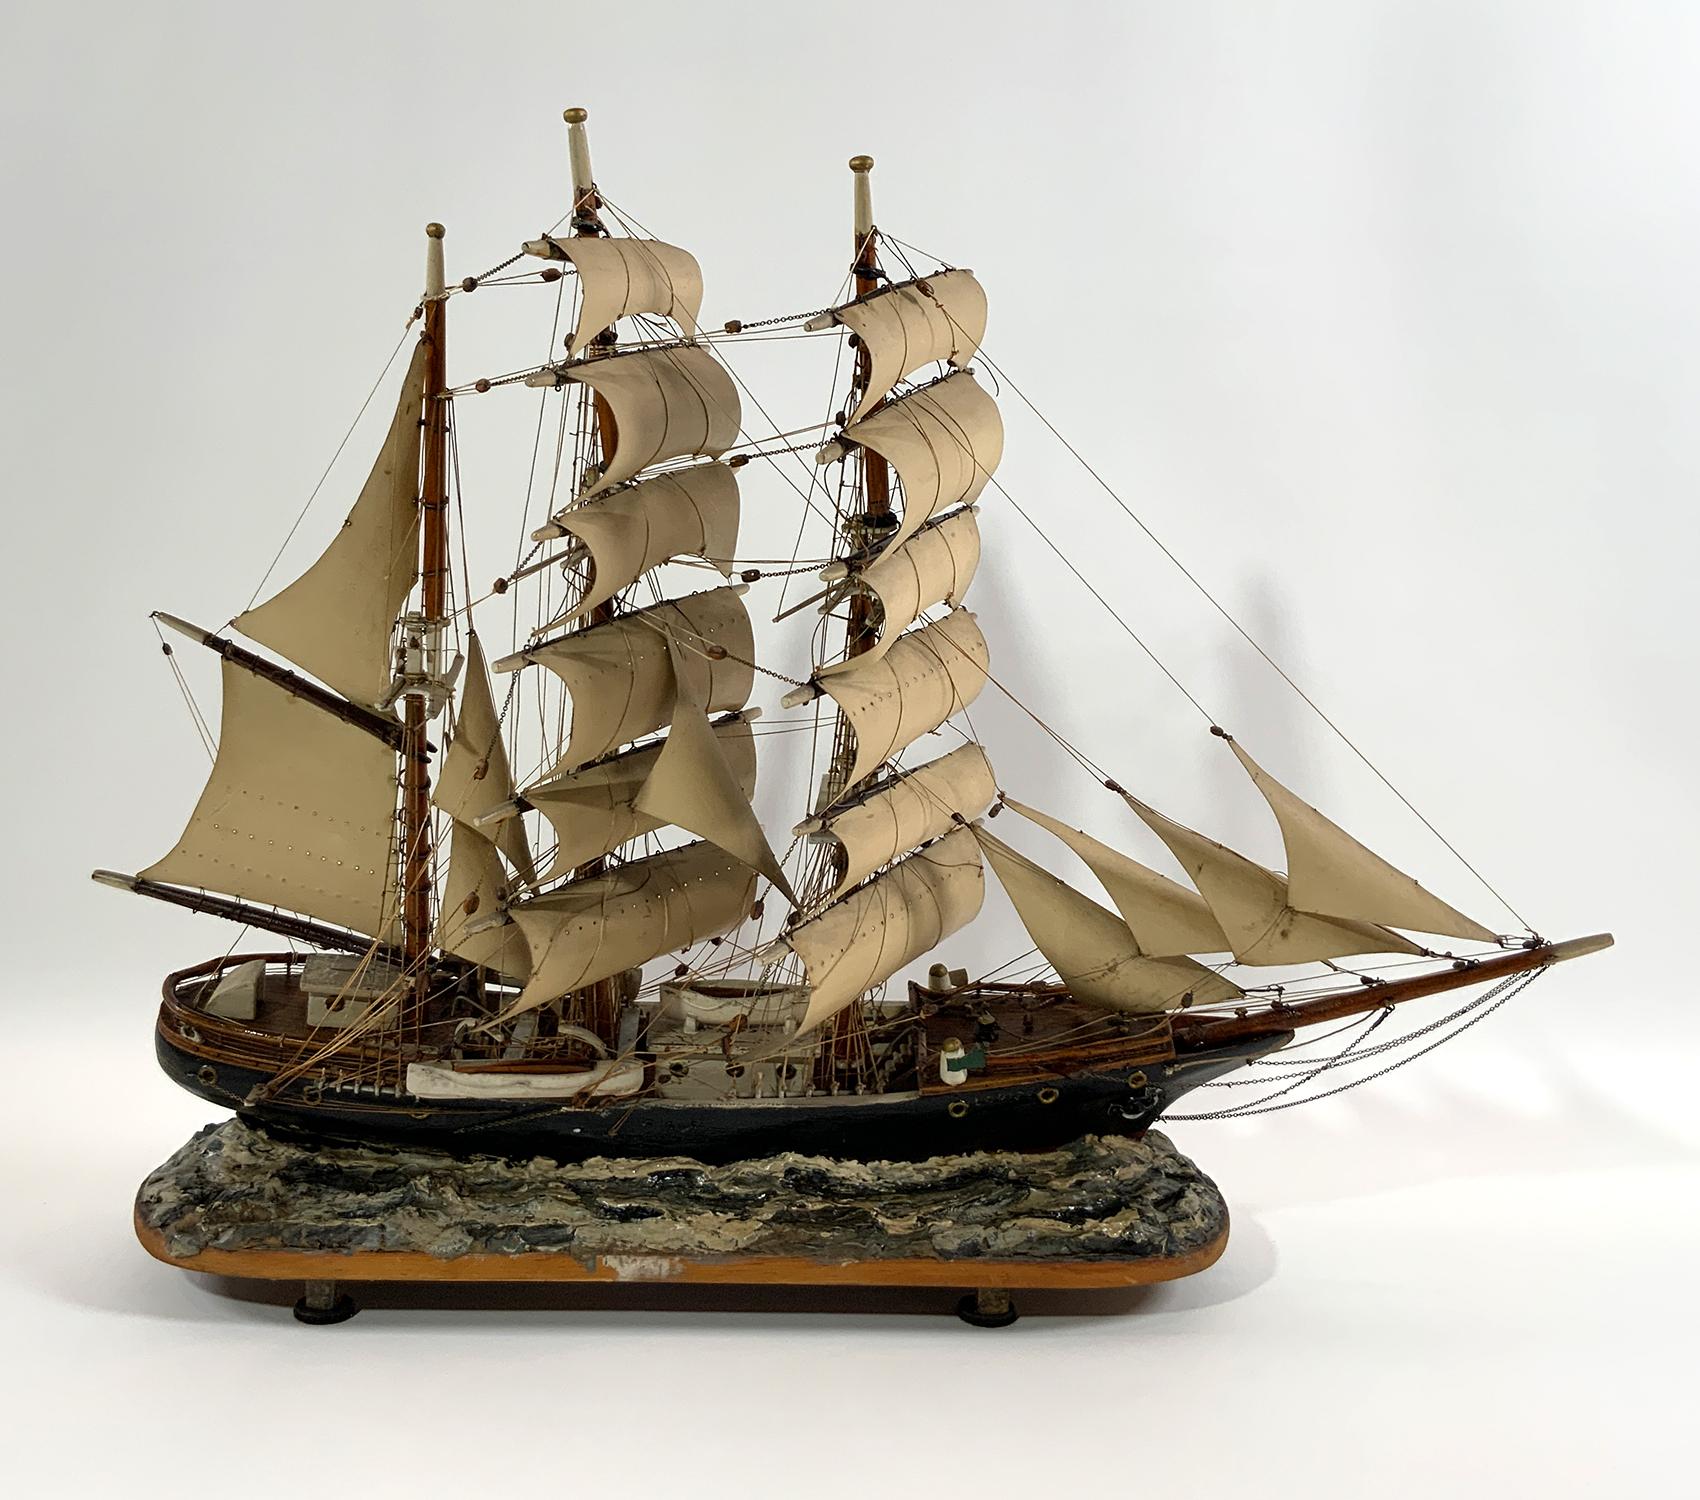 Charming antique ship model of the Windjammer Louise sailing through clay waves under full sail. Great antique boat model.